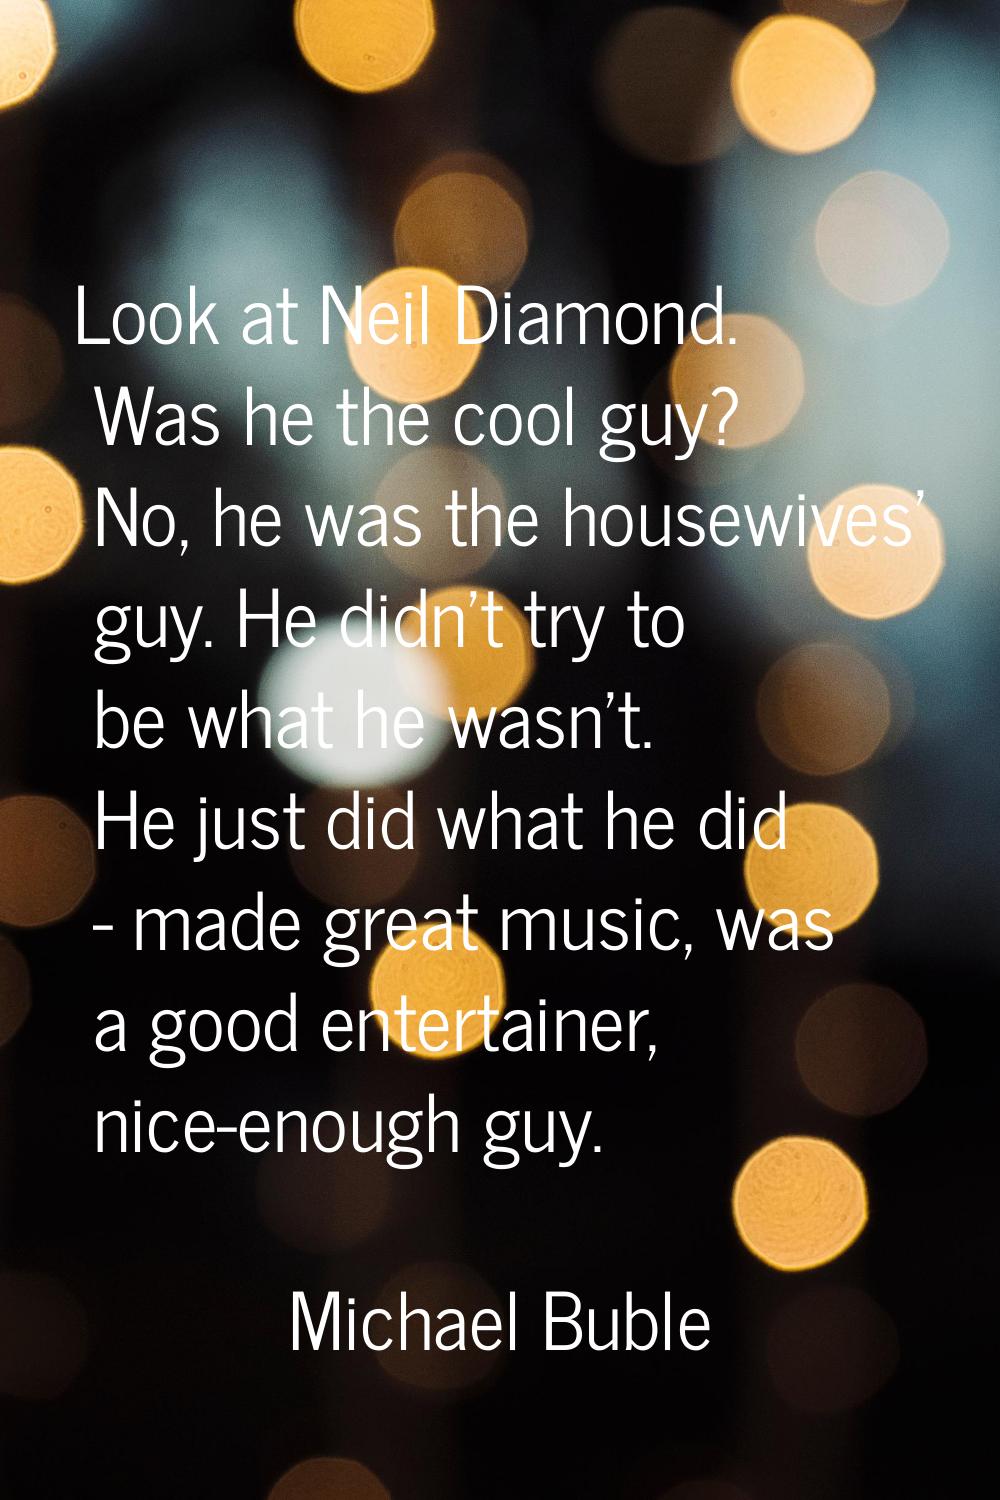 Look at Neil Diamond. Was he the cool guy? No, he was the housewives' guy. He didn't try to be what